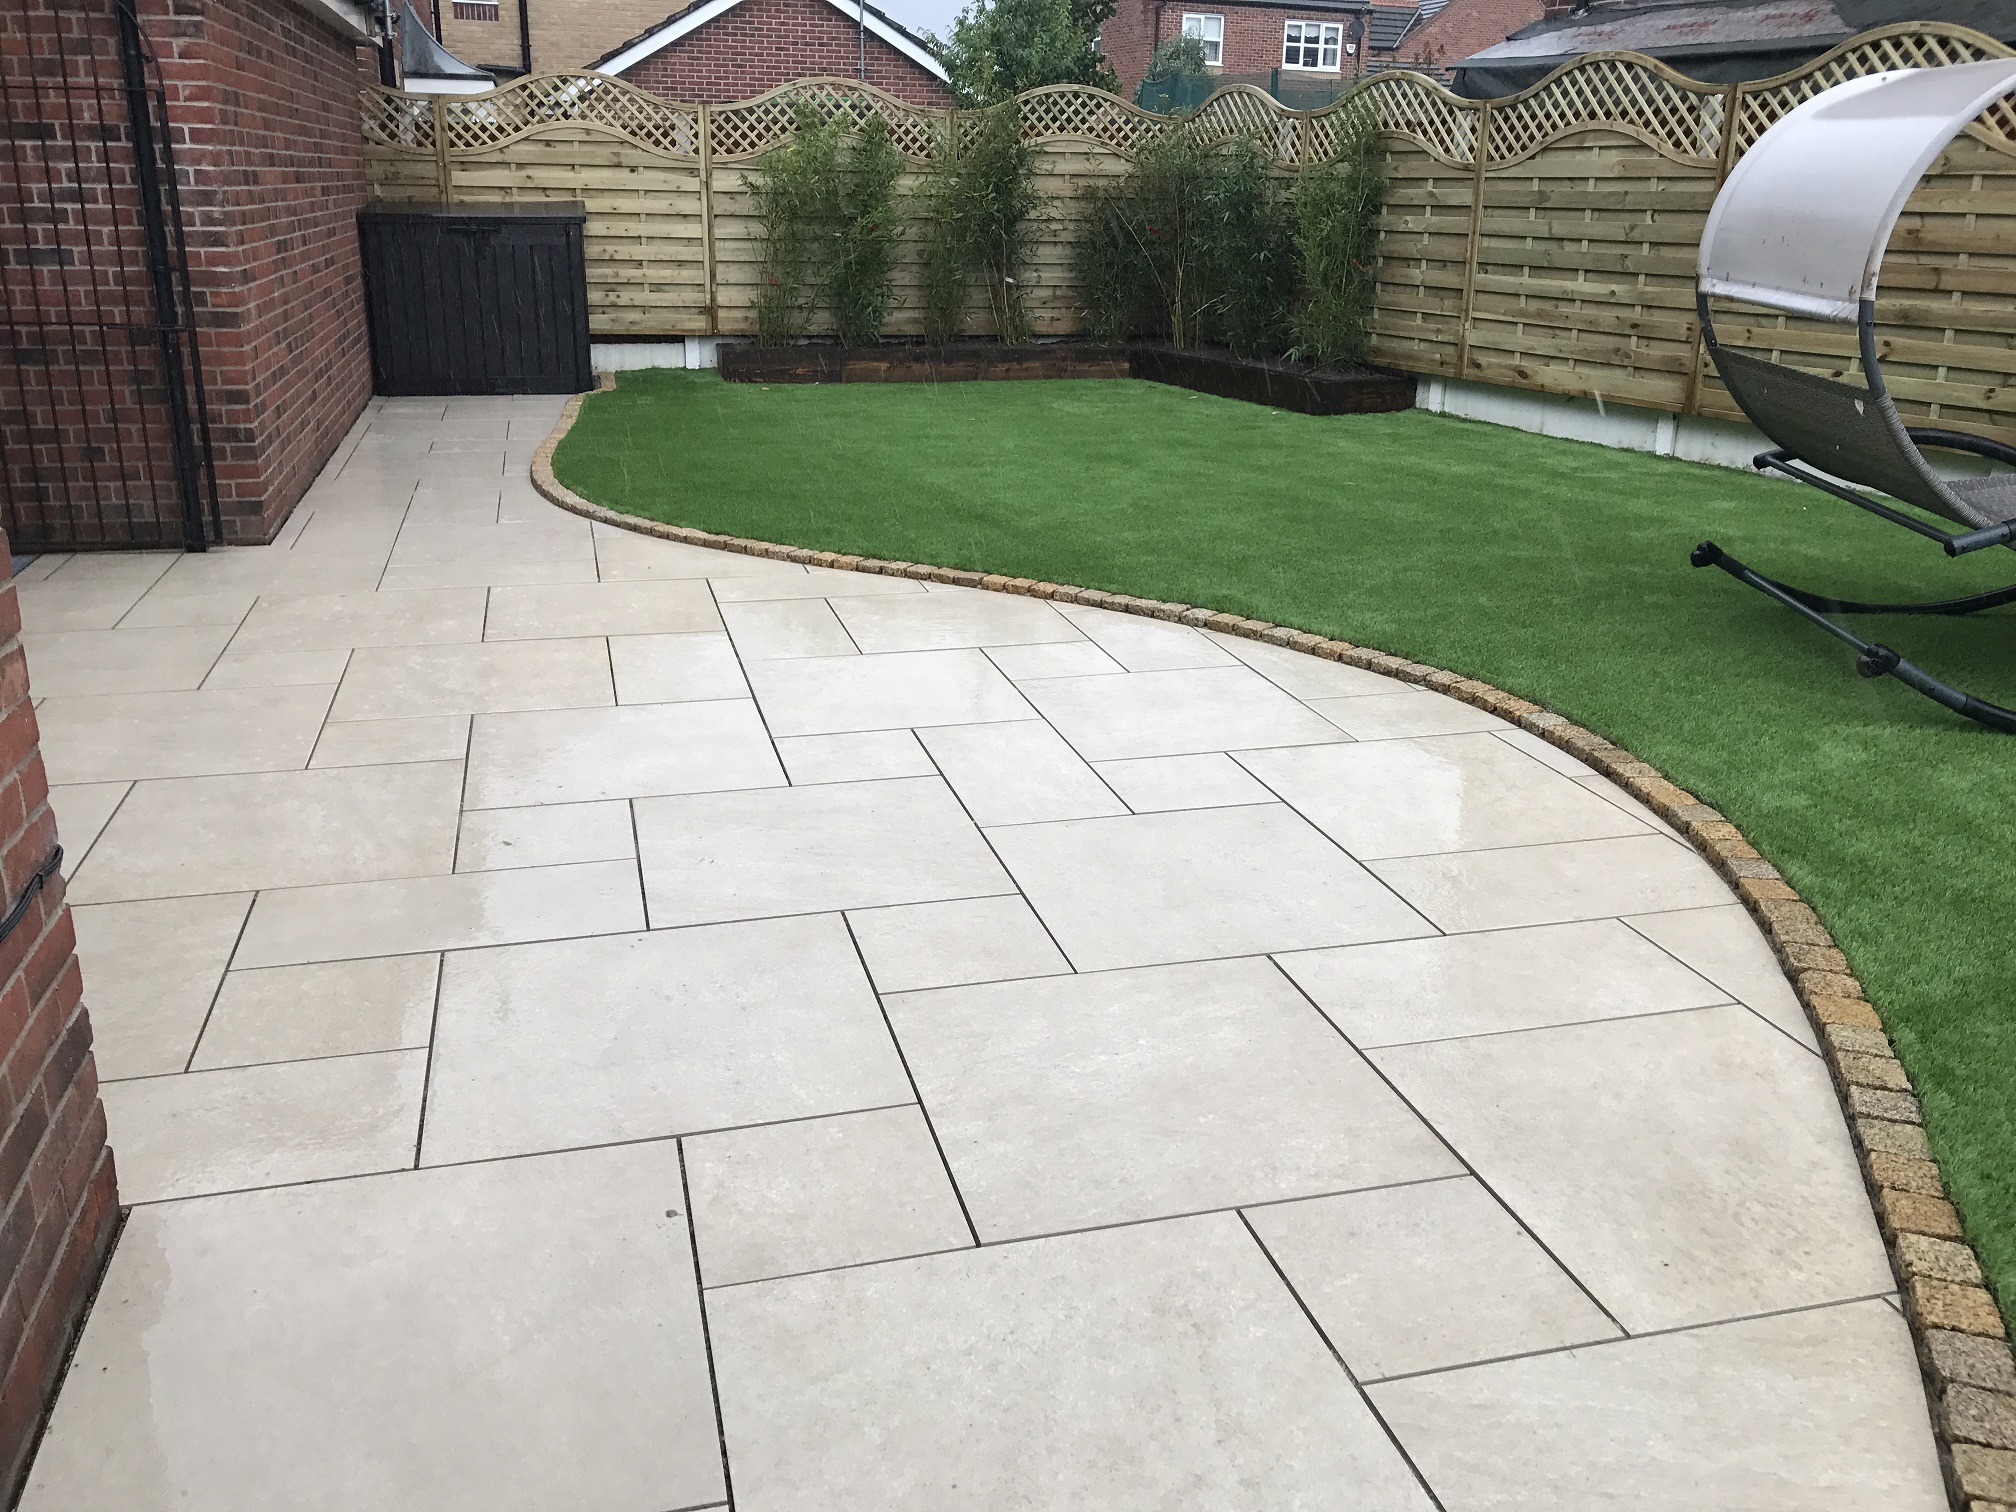 a completed patio and paving project in liverpool